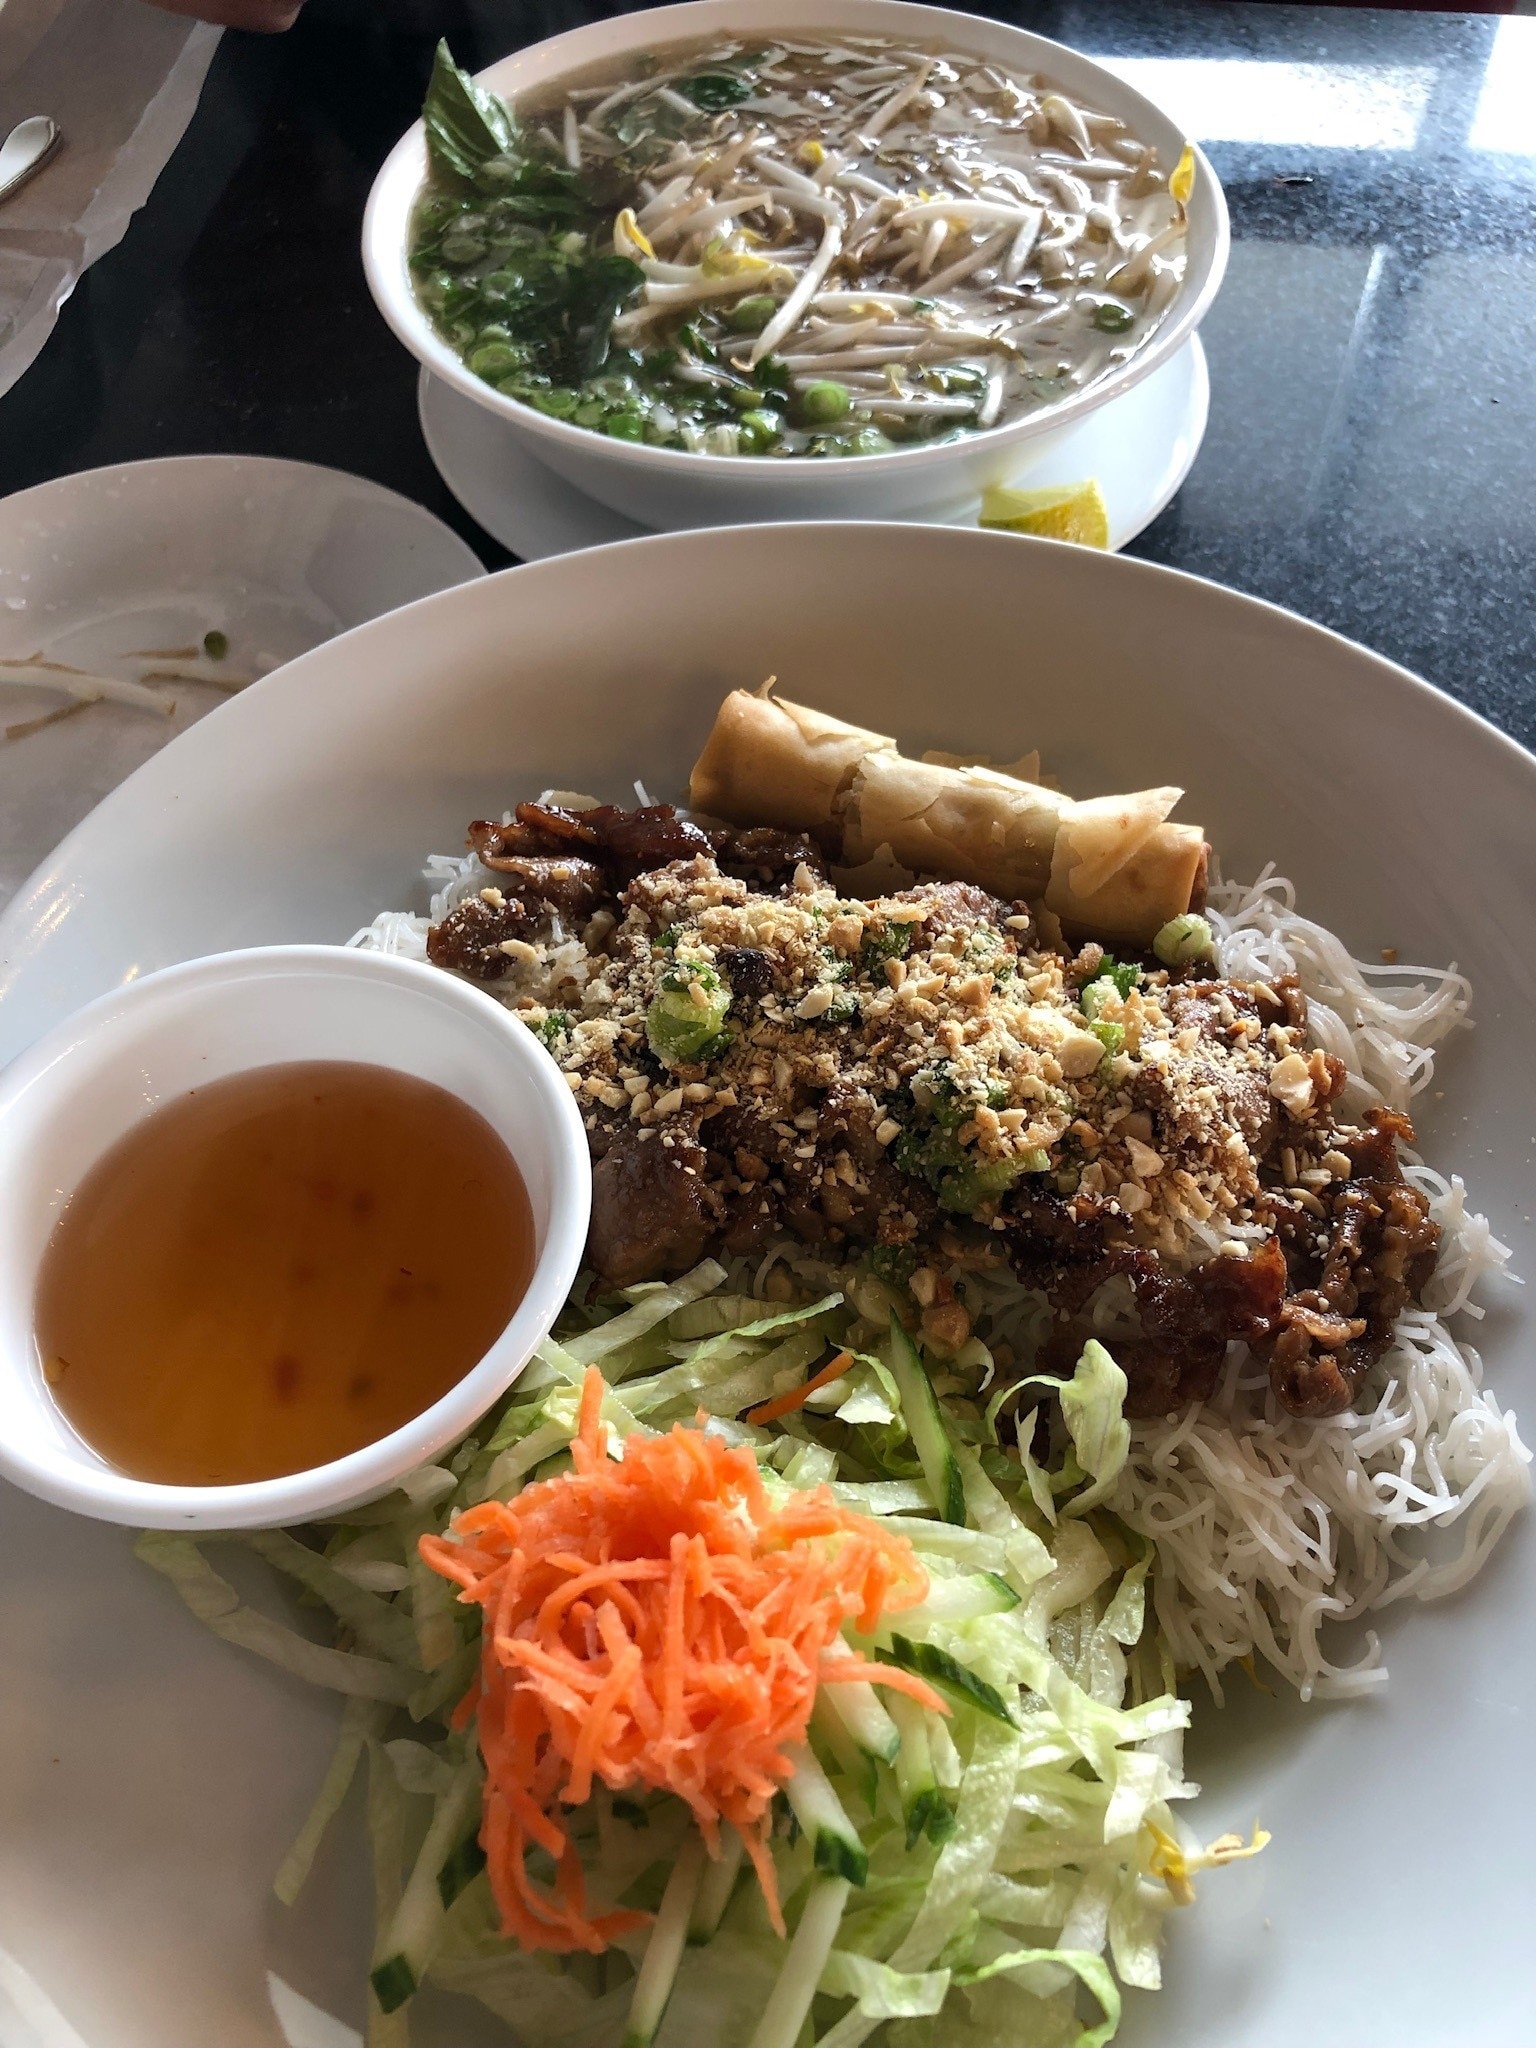 Delicious Vietnamese Beef Brisket Pho and Grilled Pork Bun.

#TroverFoodies #Culture #Trovember